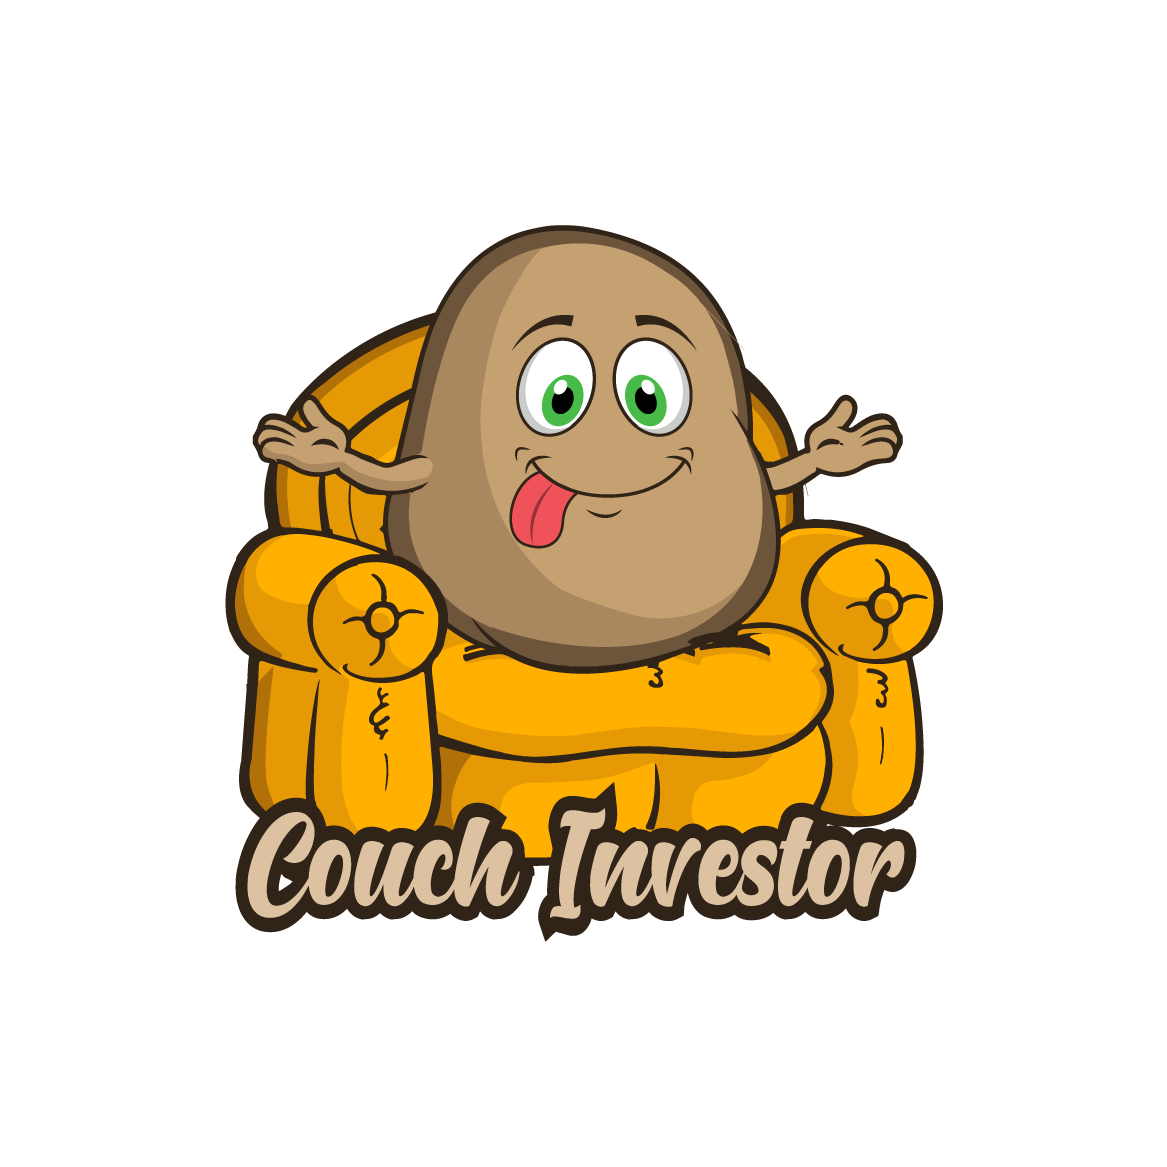 Couch Investor’s Newsletter